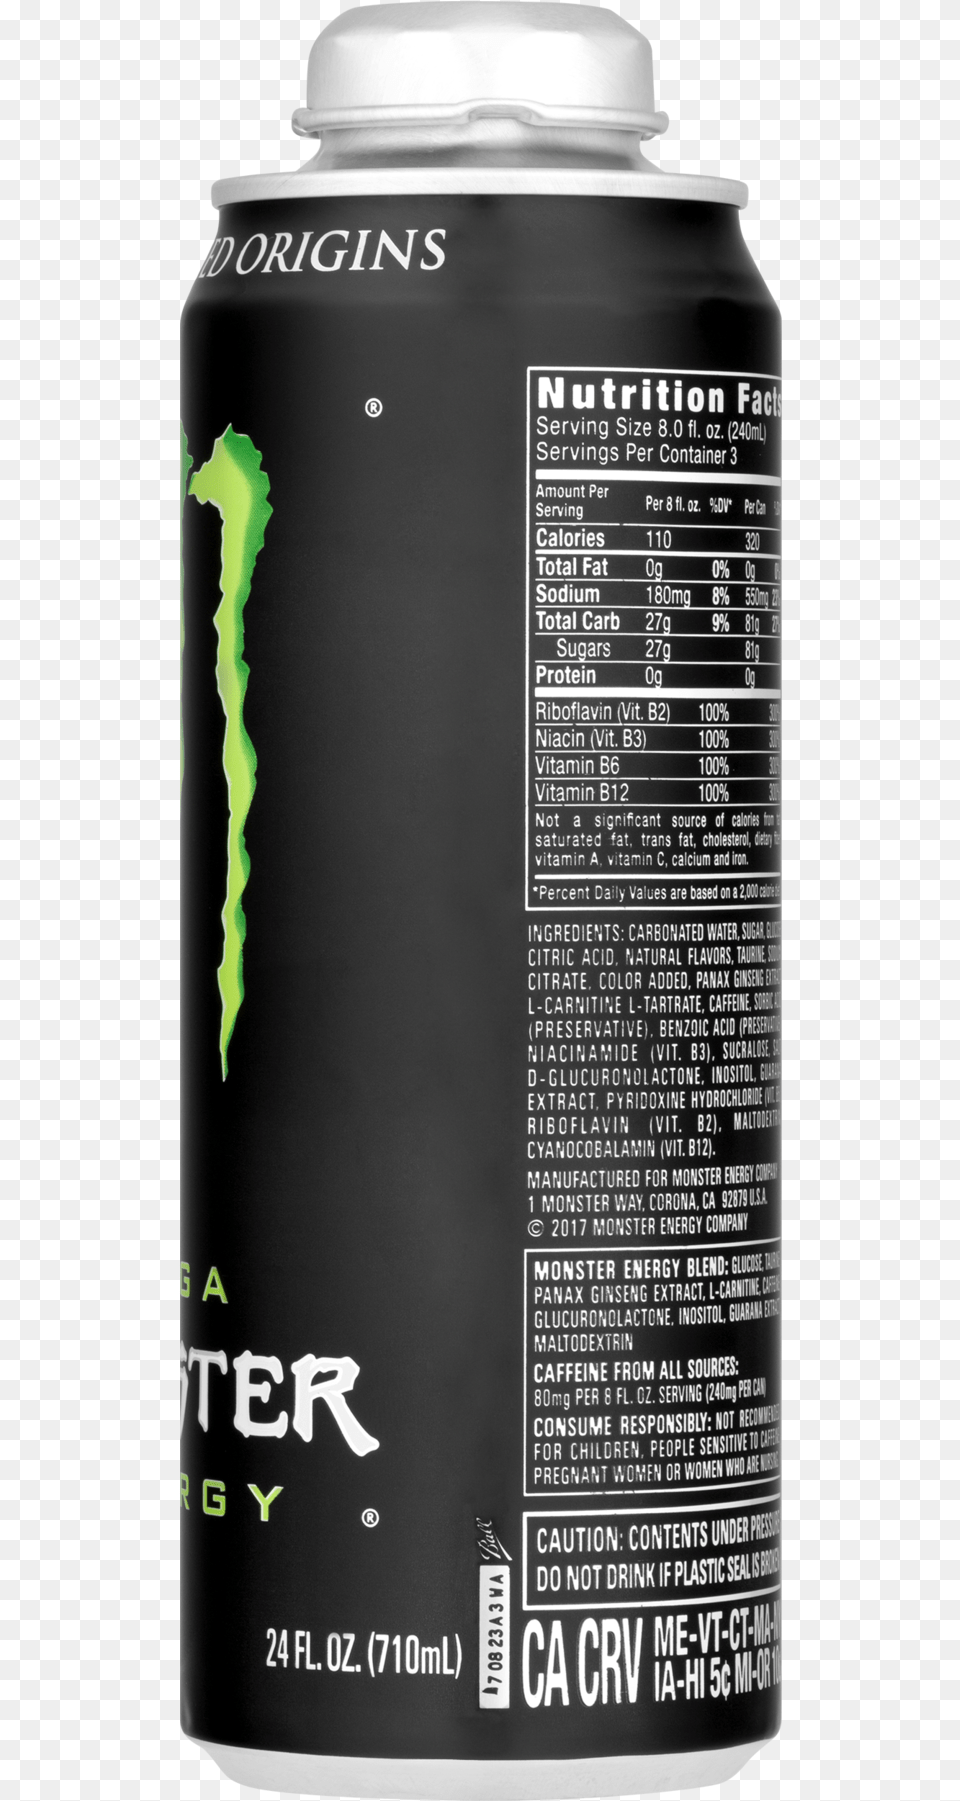 Monster Drink Monster Energy Drink Can Bfc, Tin, Spray Can Png